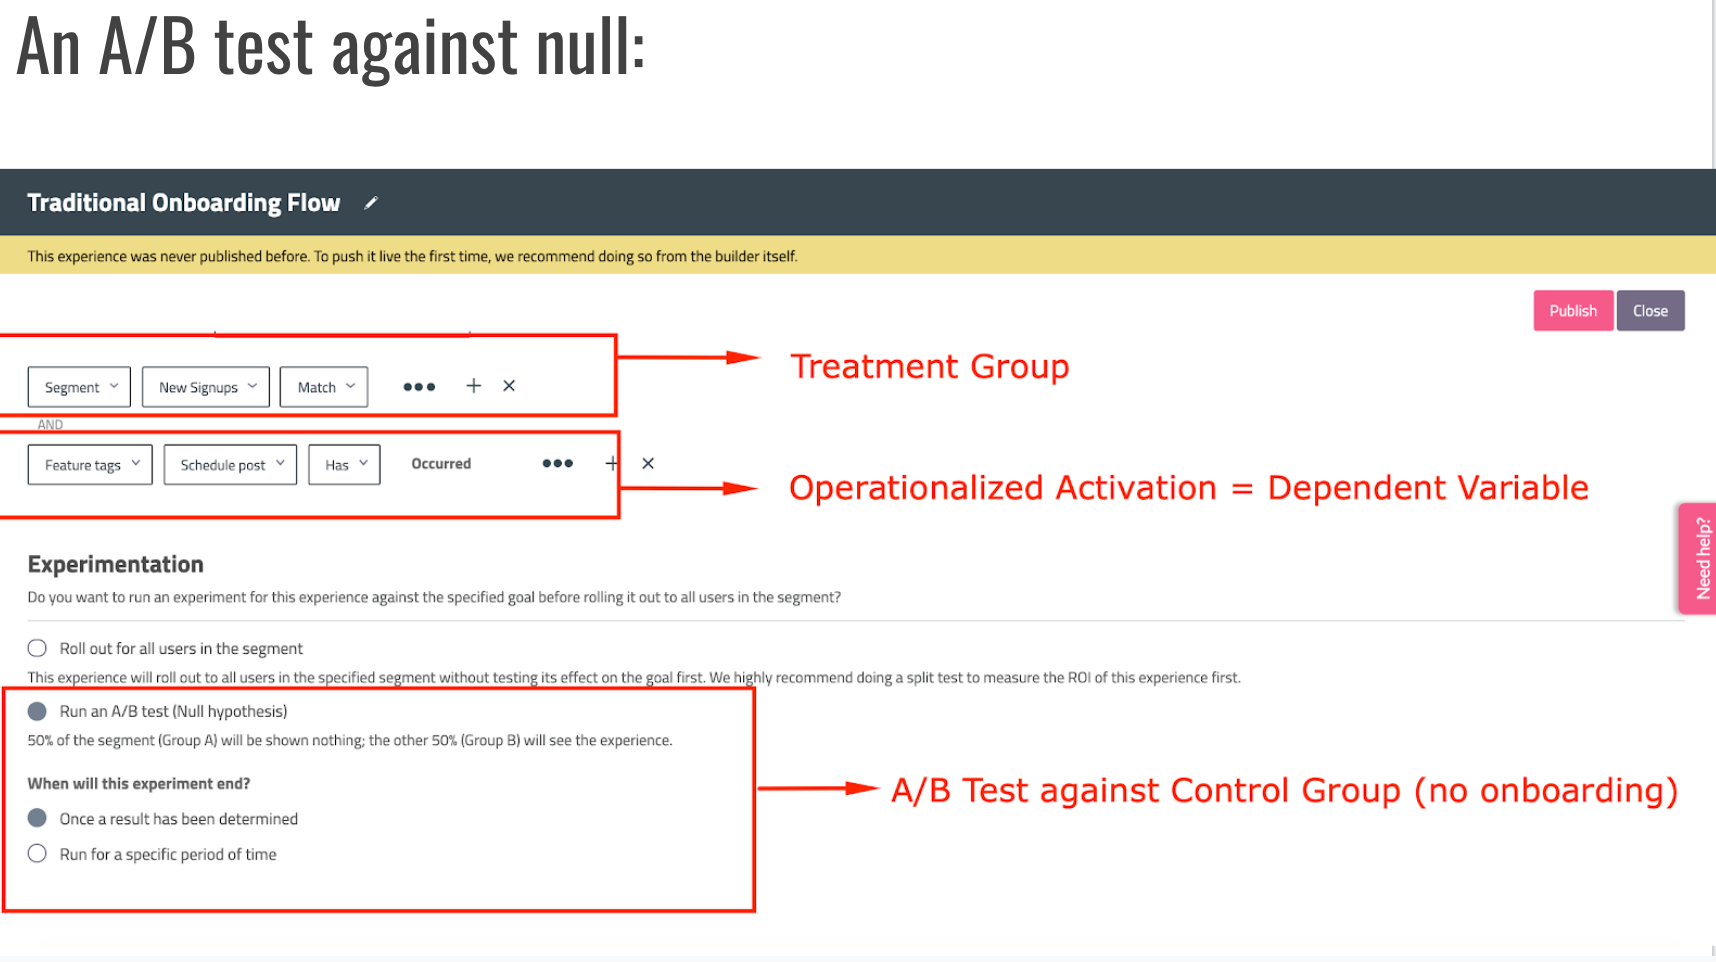 A:B test against null